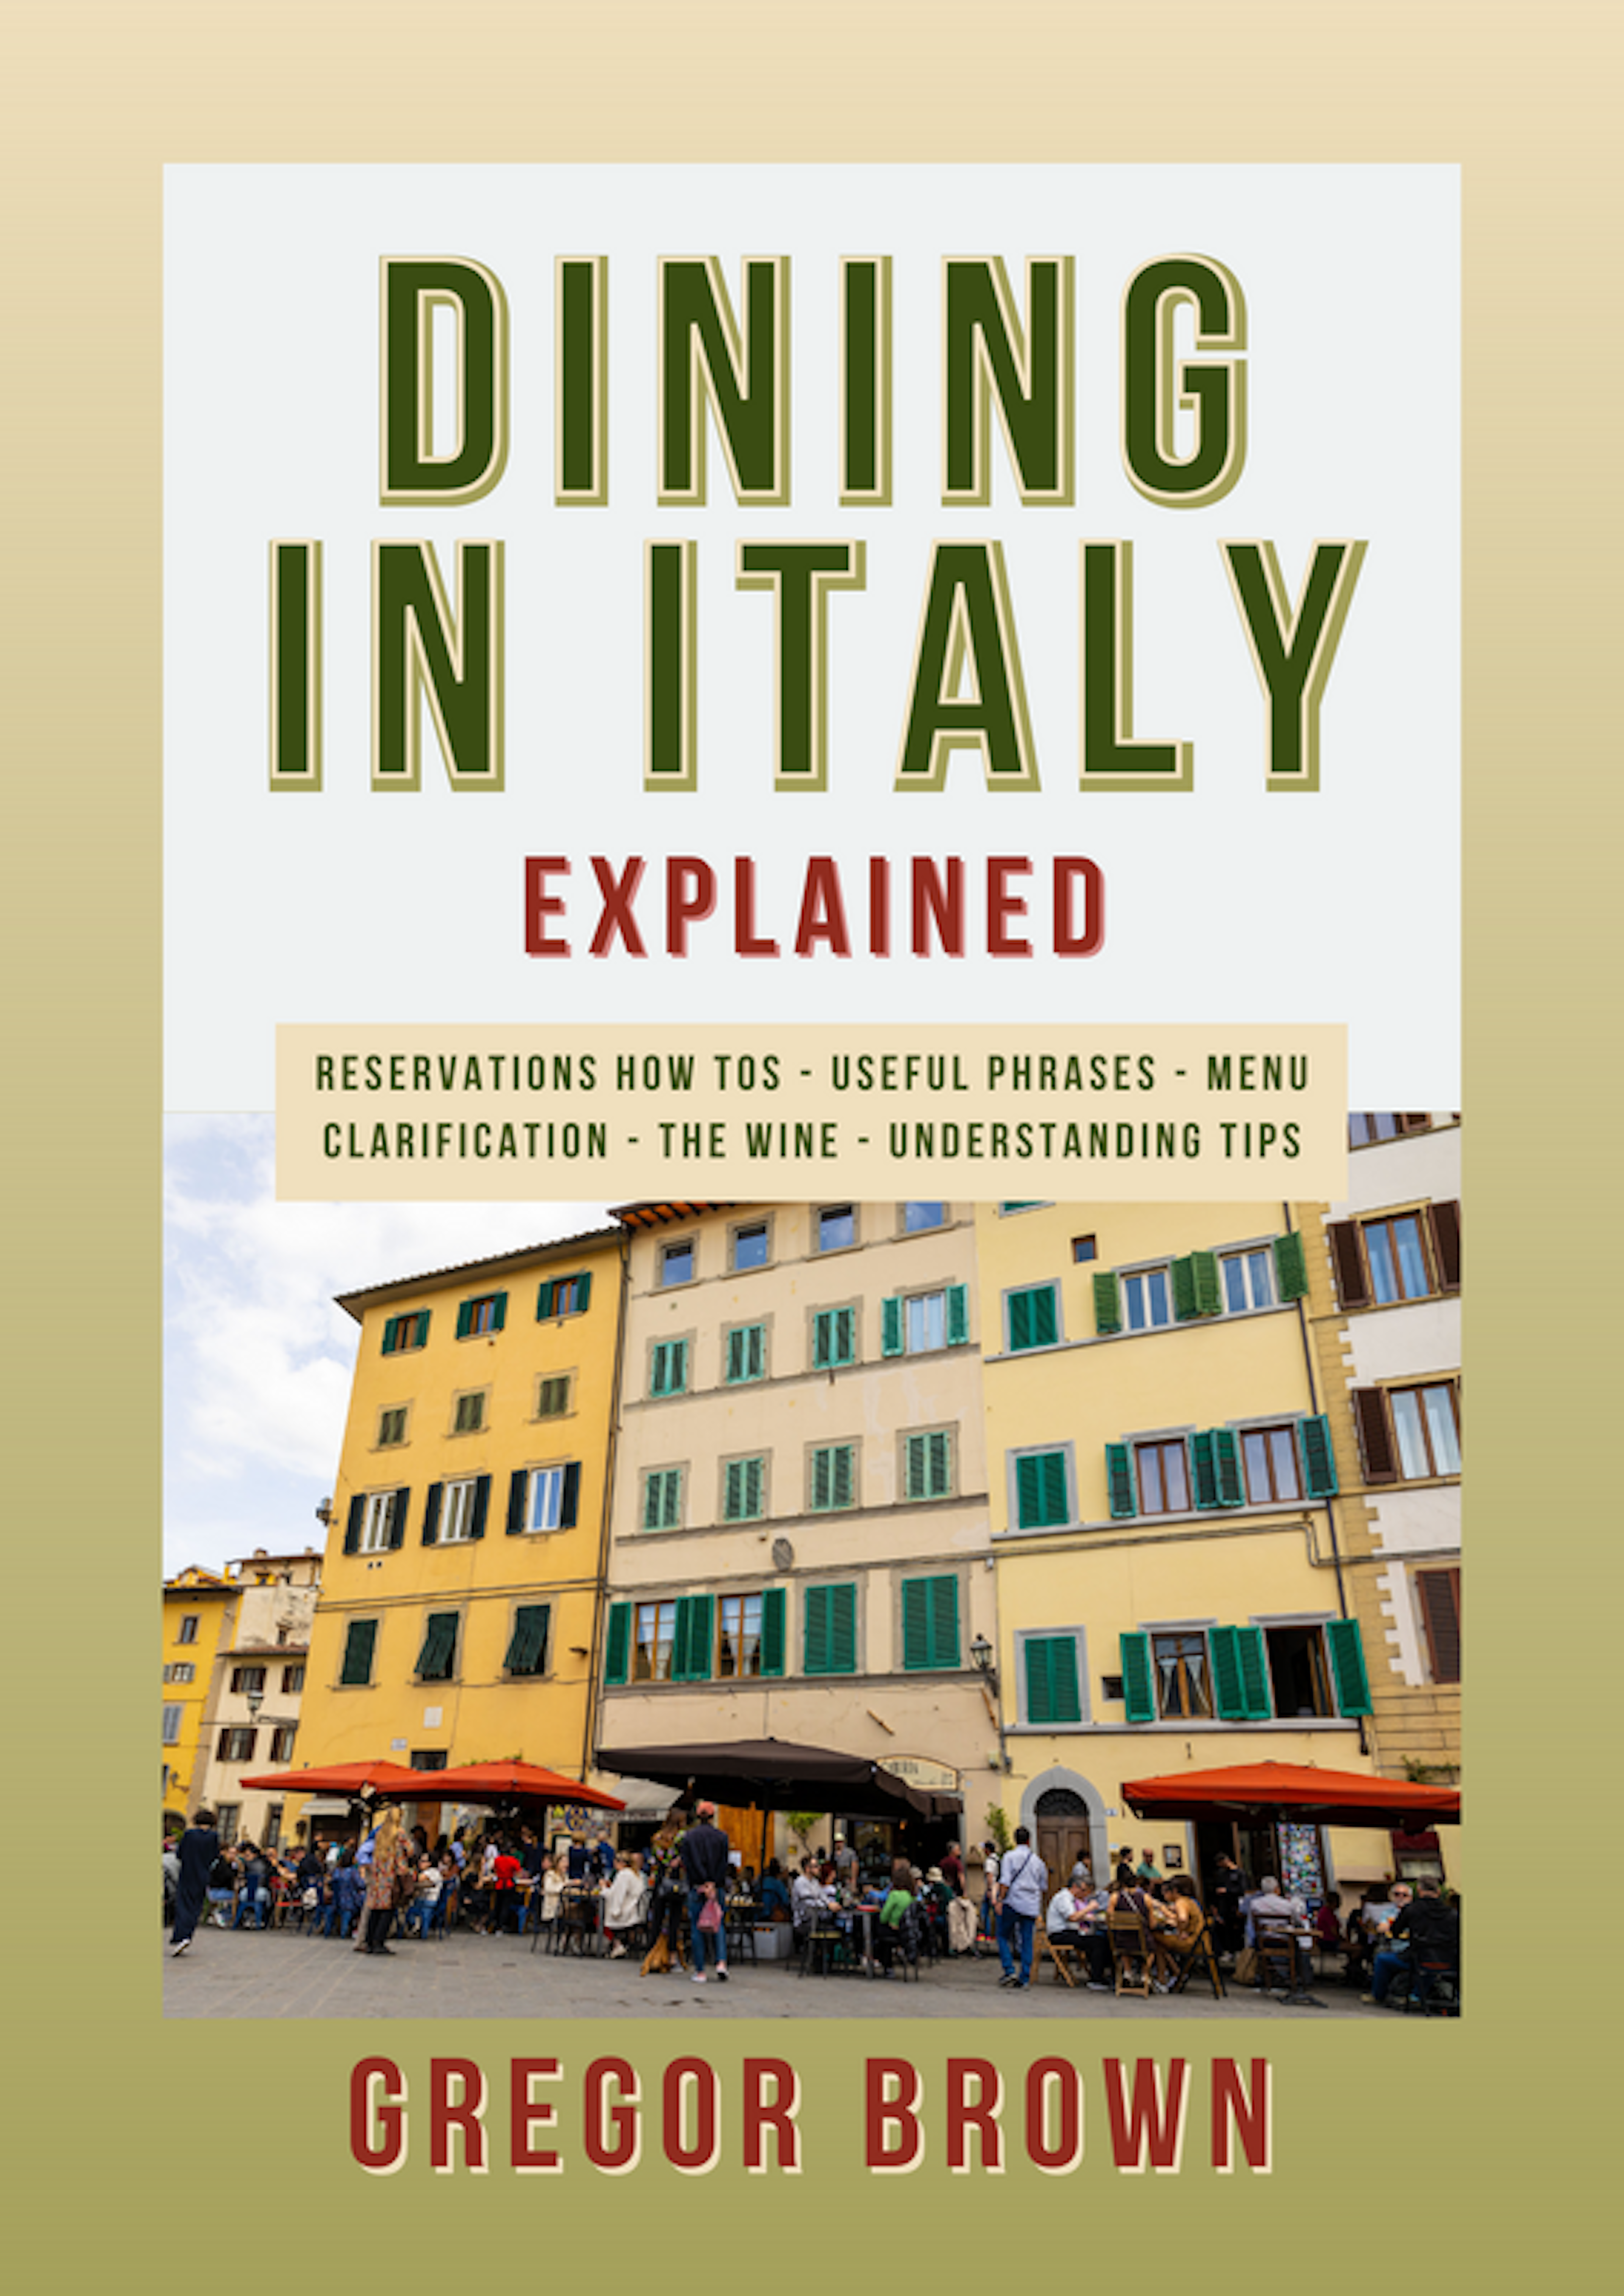 Dining in Italy - An Explainer Guide